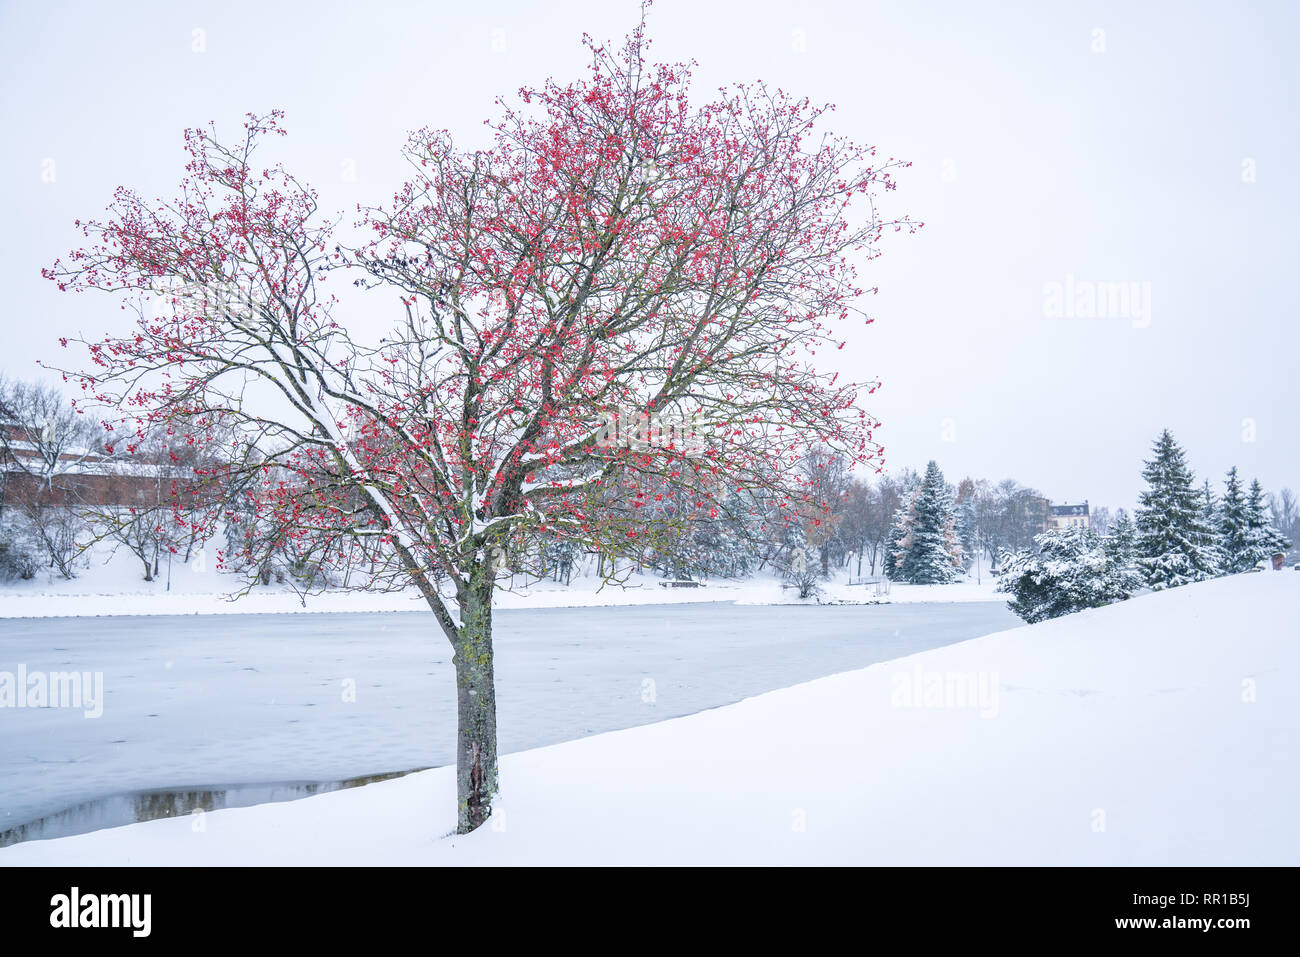 Single snow covered tree with bright red berries and no leaves by frozen lake surrounded by snow. Stock Photo